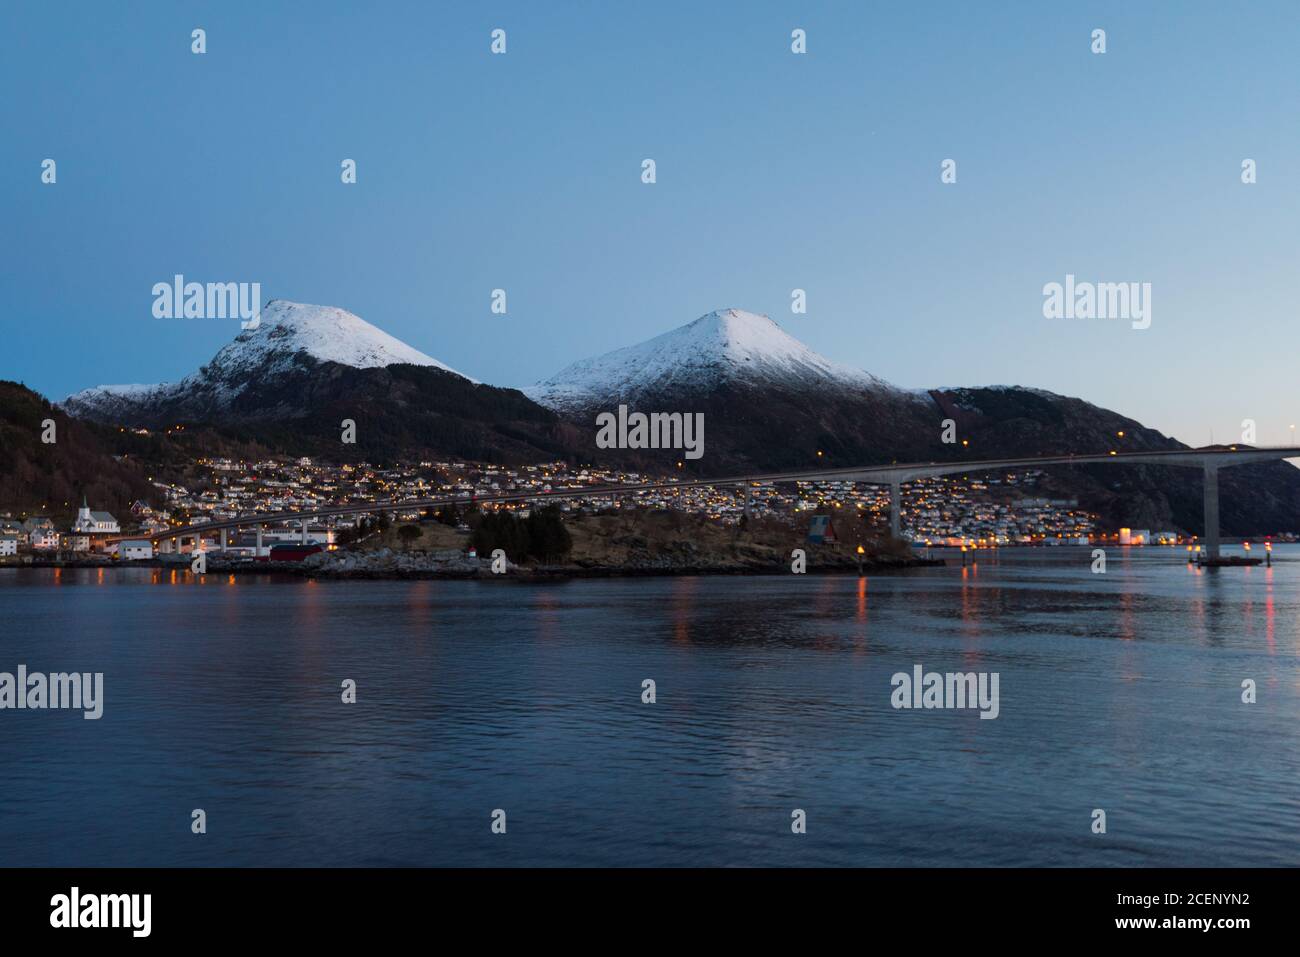 The town Maloy in Norway seen from cruise ship in early morning with snow capped mountains on clear winter day Stock Photo